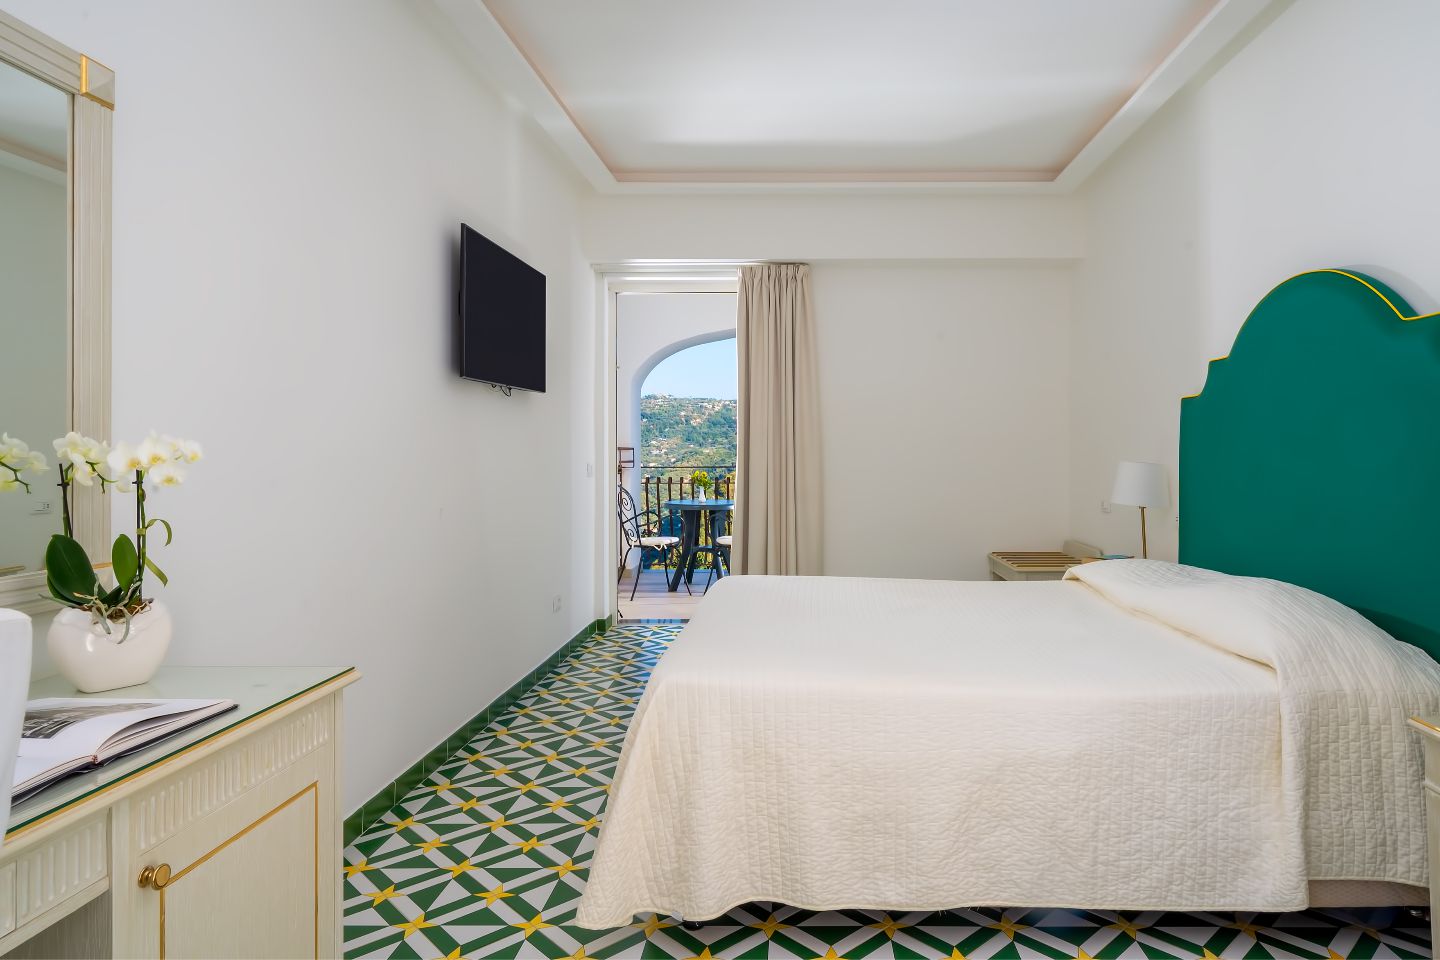  Classic Double Room with balcony, partial sea view - 4